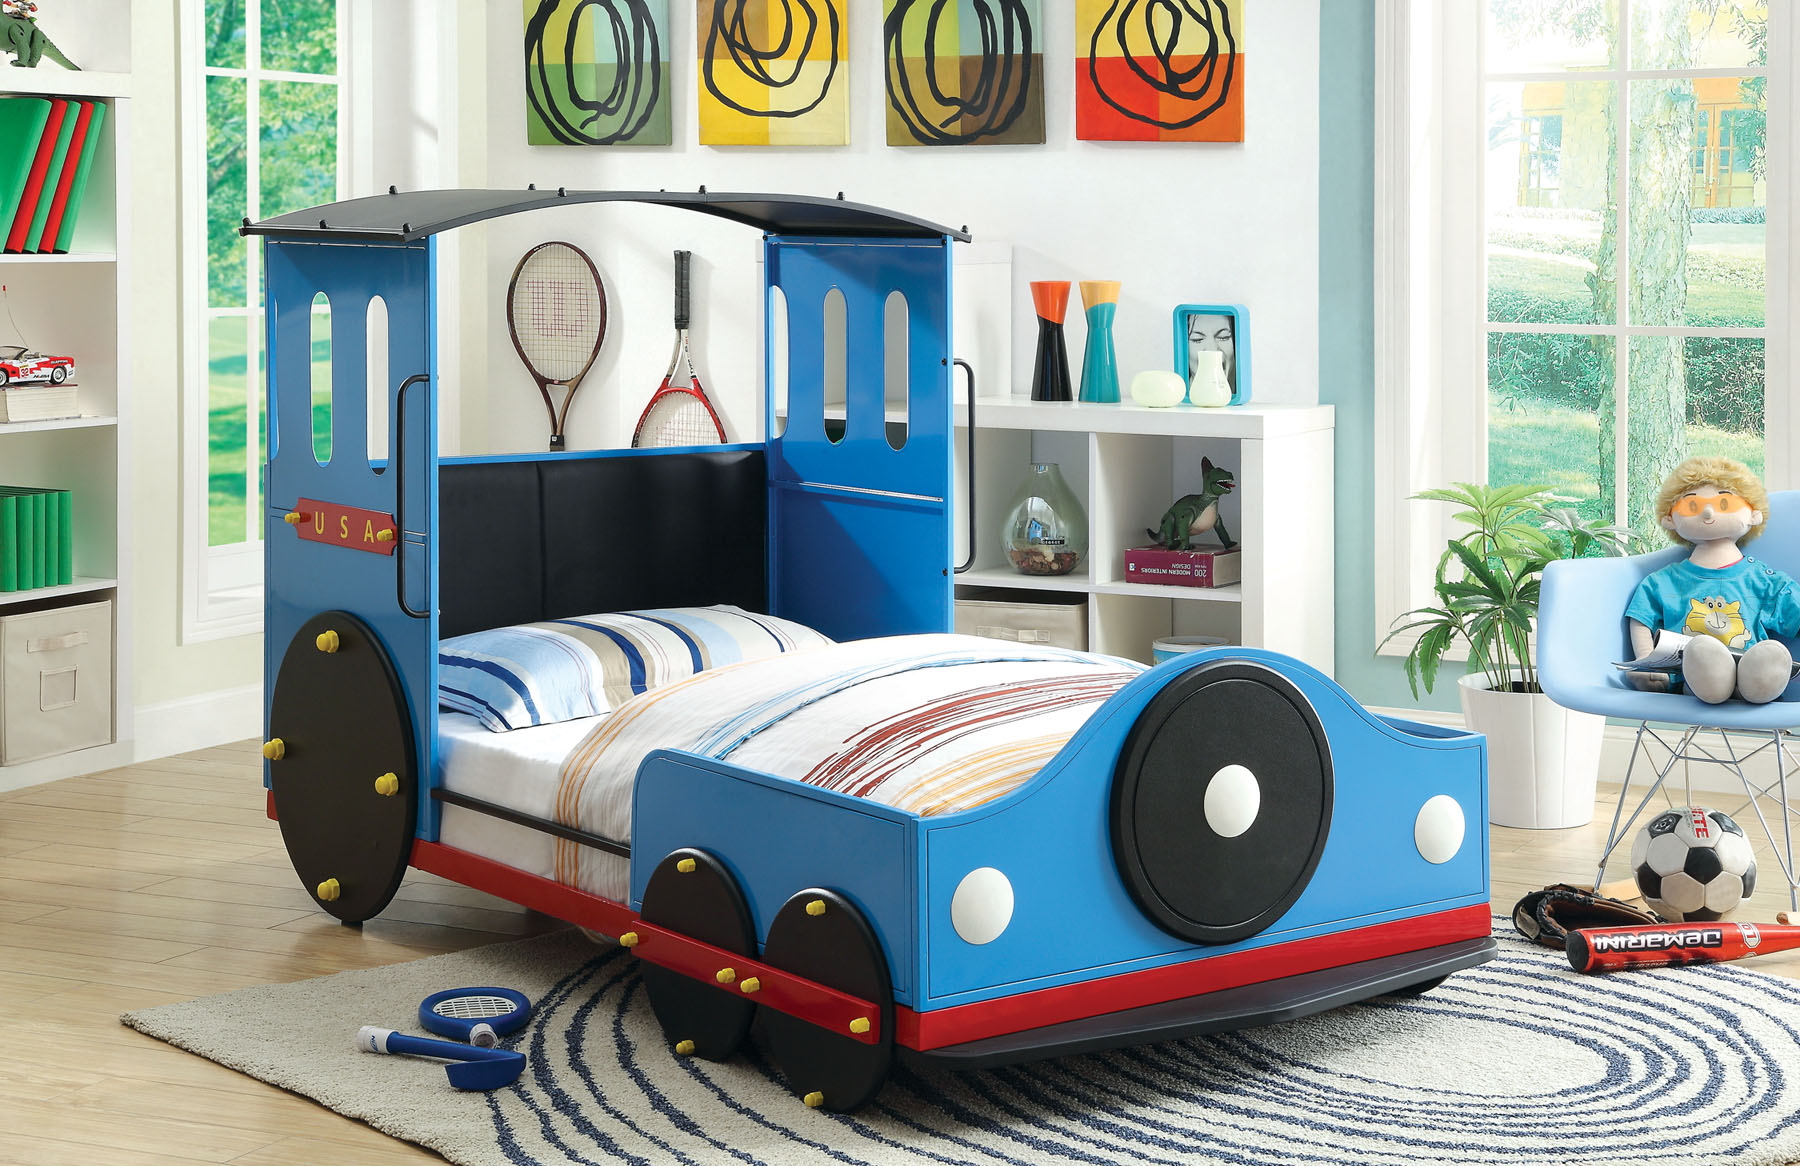 Train beds for toddlers